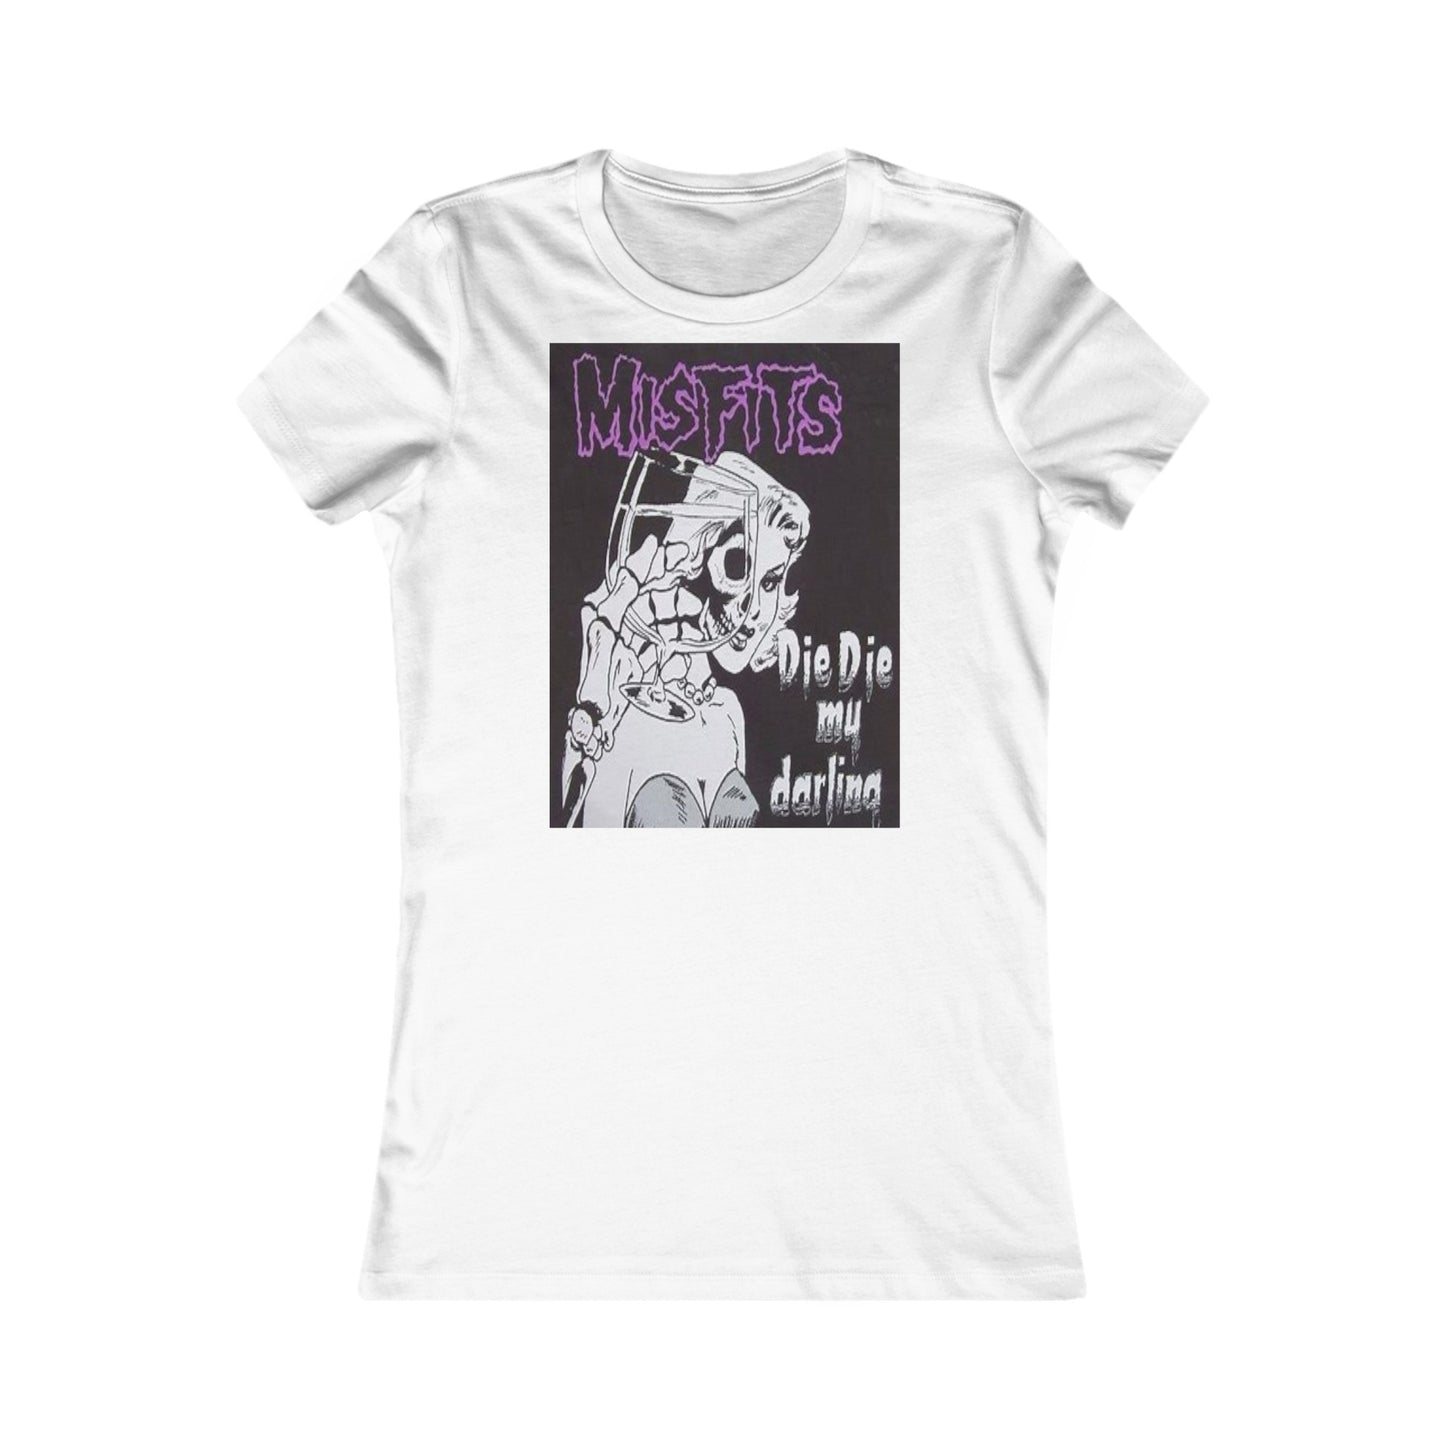 Culture Royal Design Women's Favorite Tee With Misfits Cover Band Poster Picture On It, Die Die My Darling